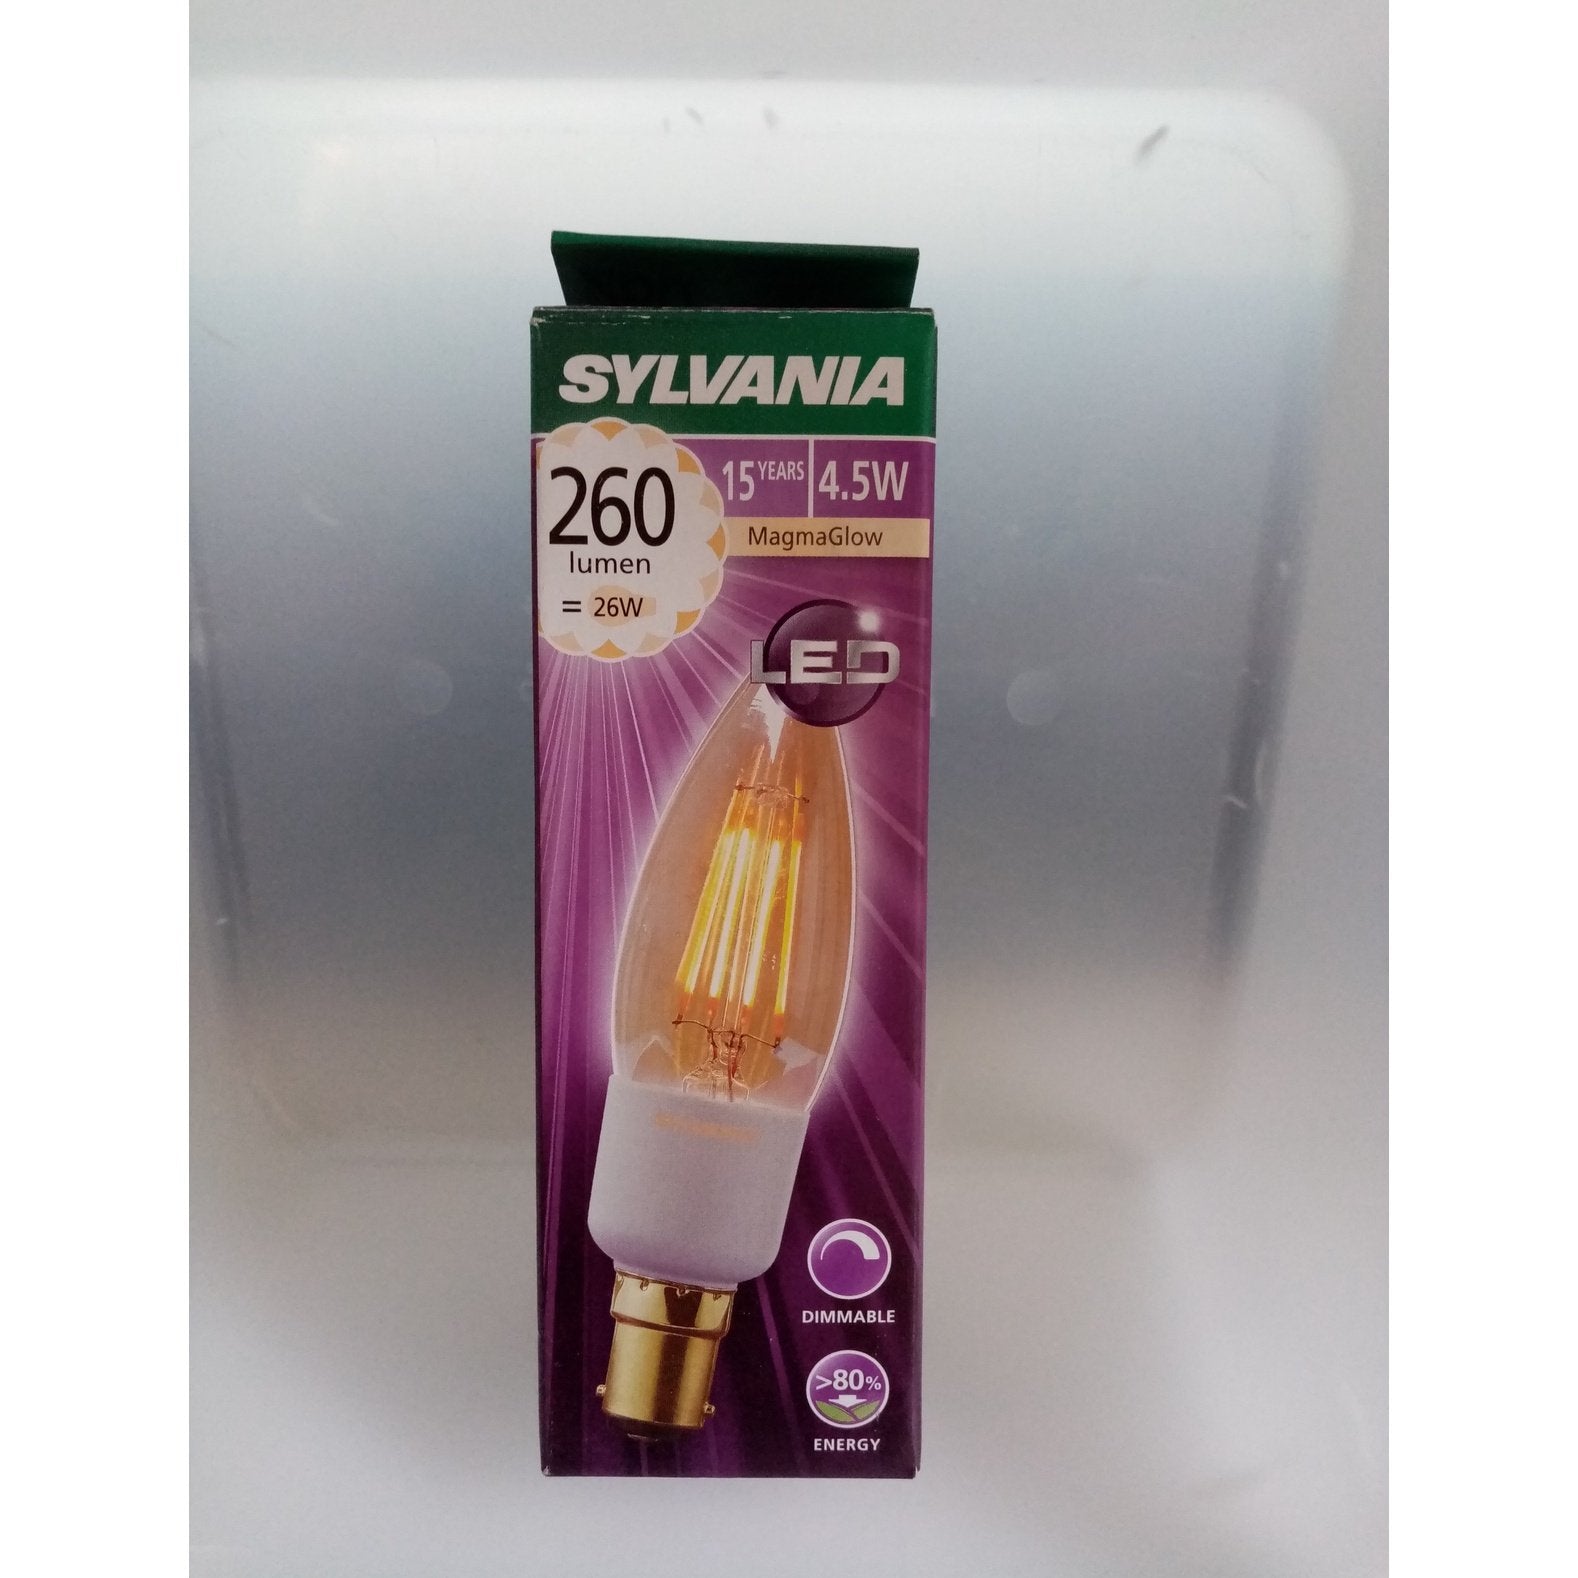 Sylvania LED Filament Dimmable Candle 4.5W SBC x 3pack - hightectrading.com